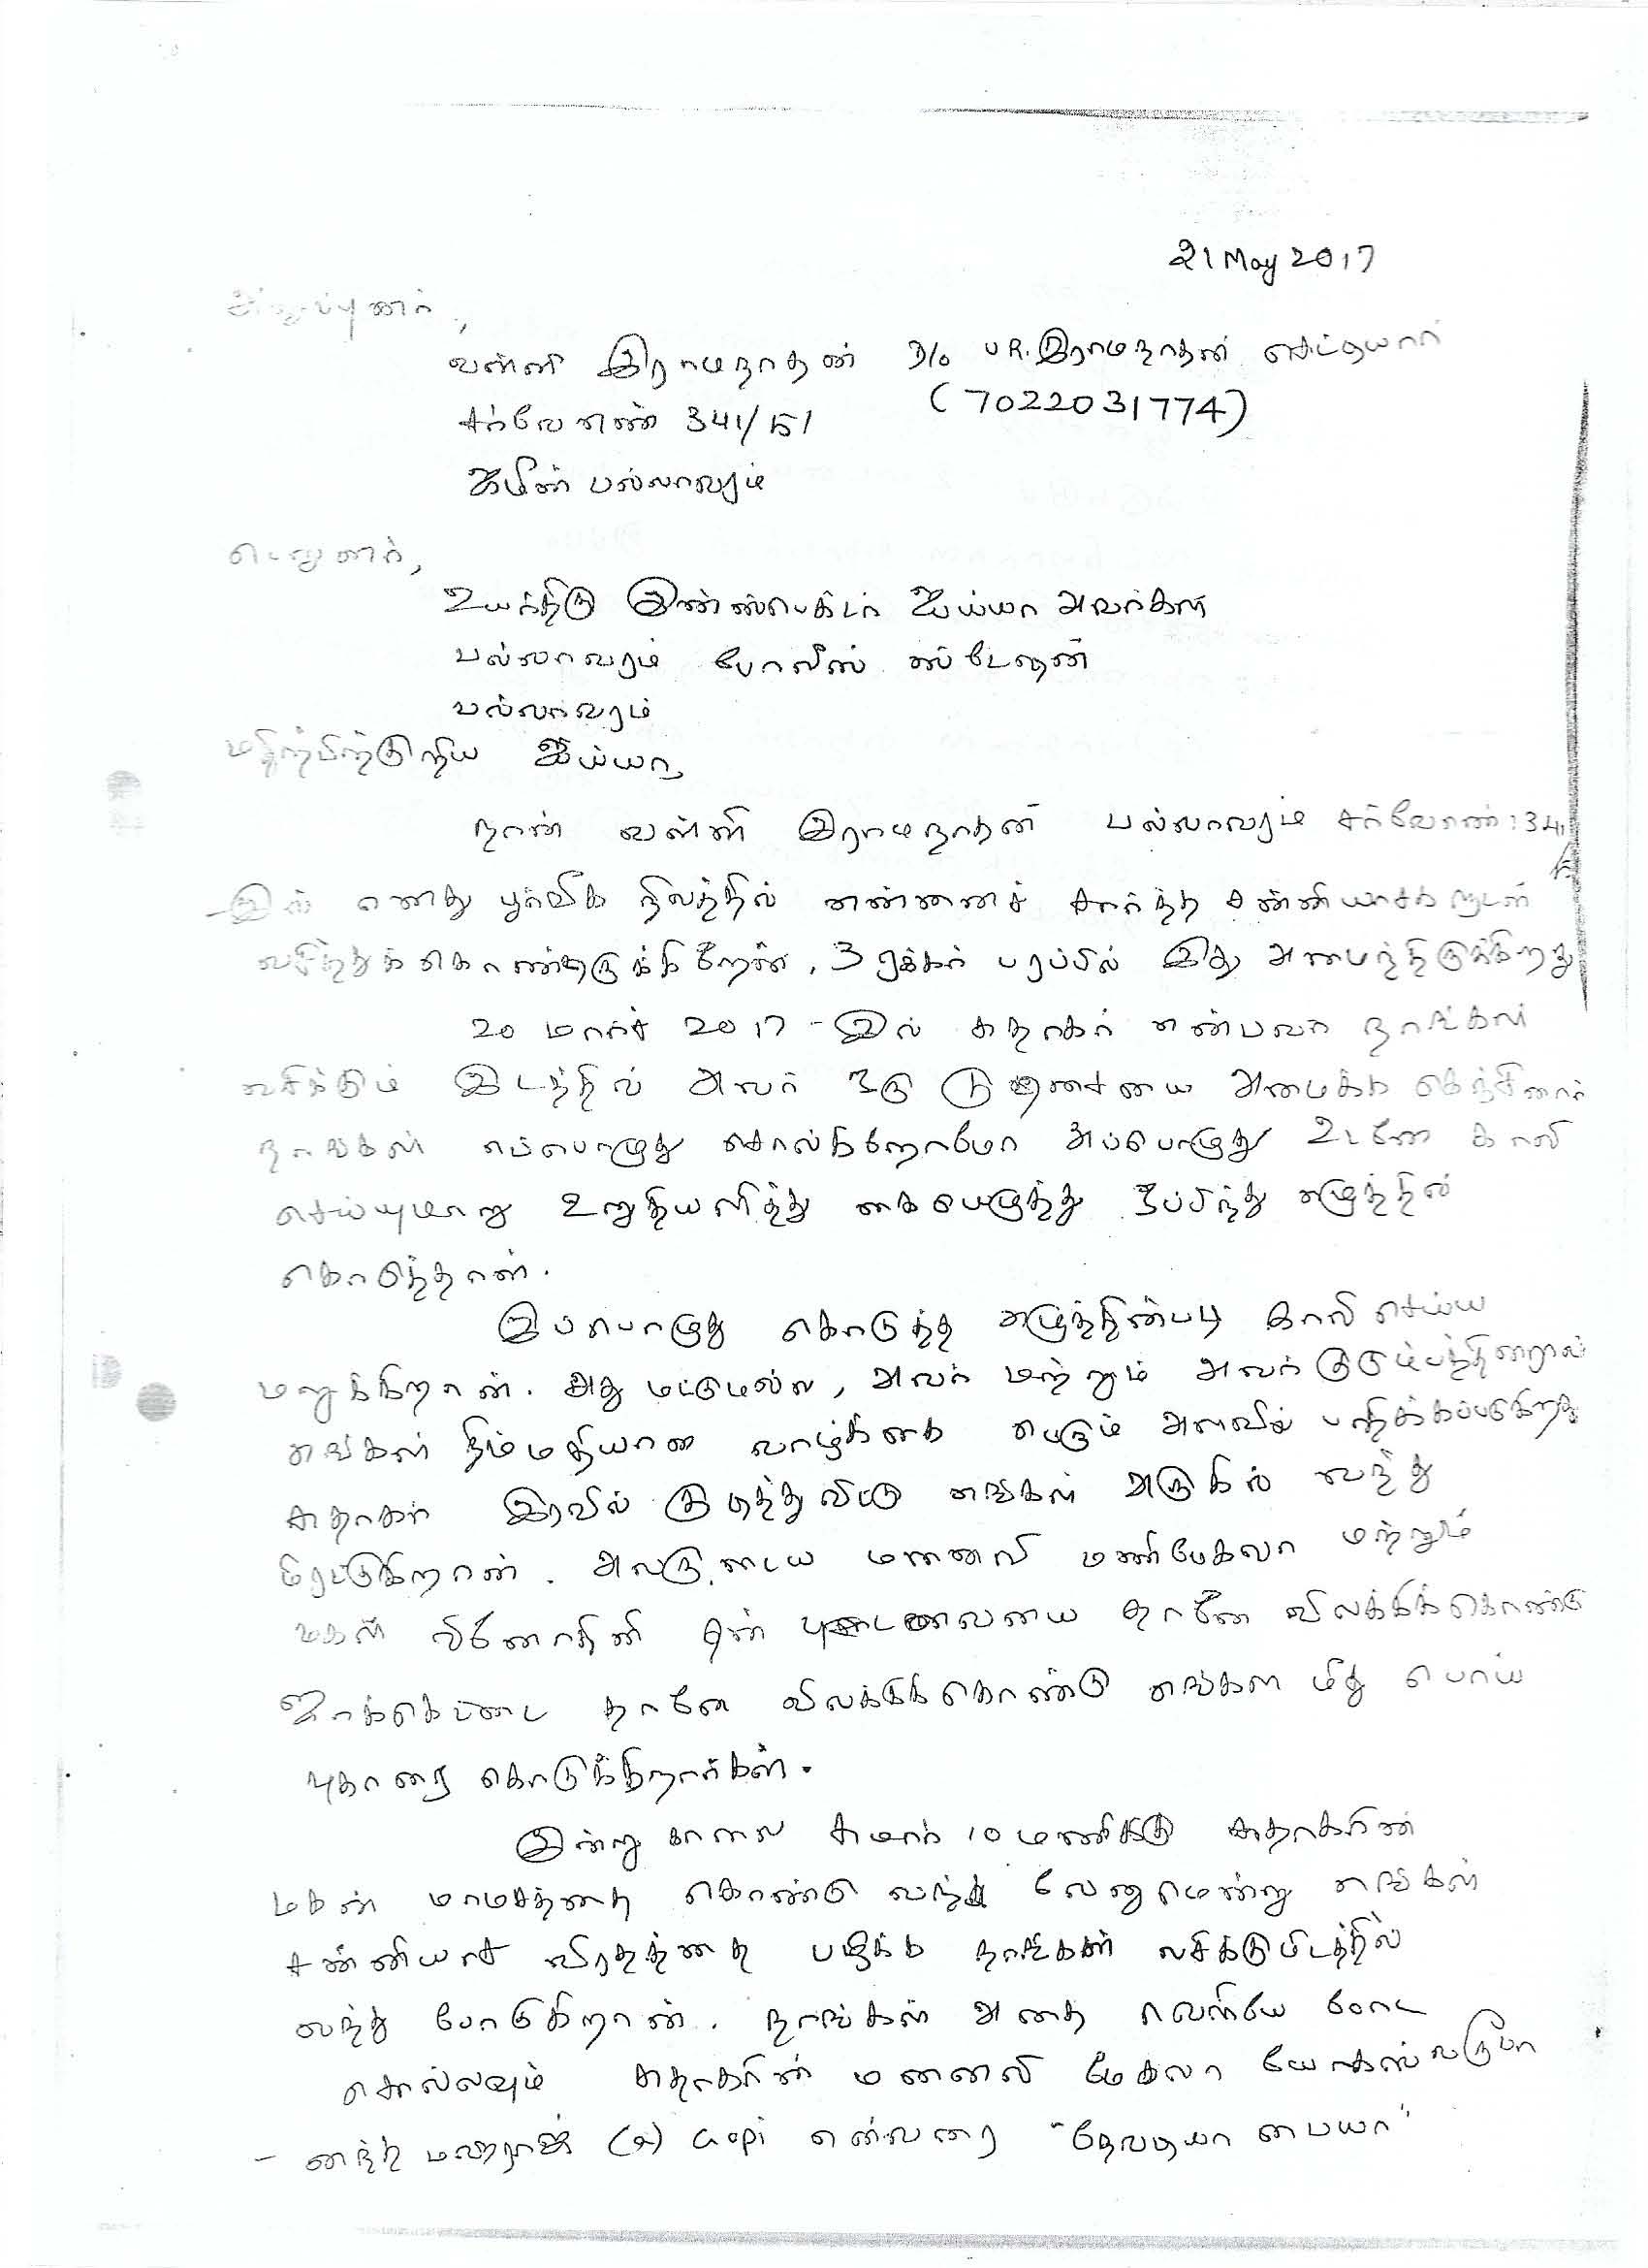 Bakthika Swami Complaint 21 May 2017_Page_1